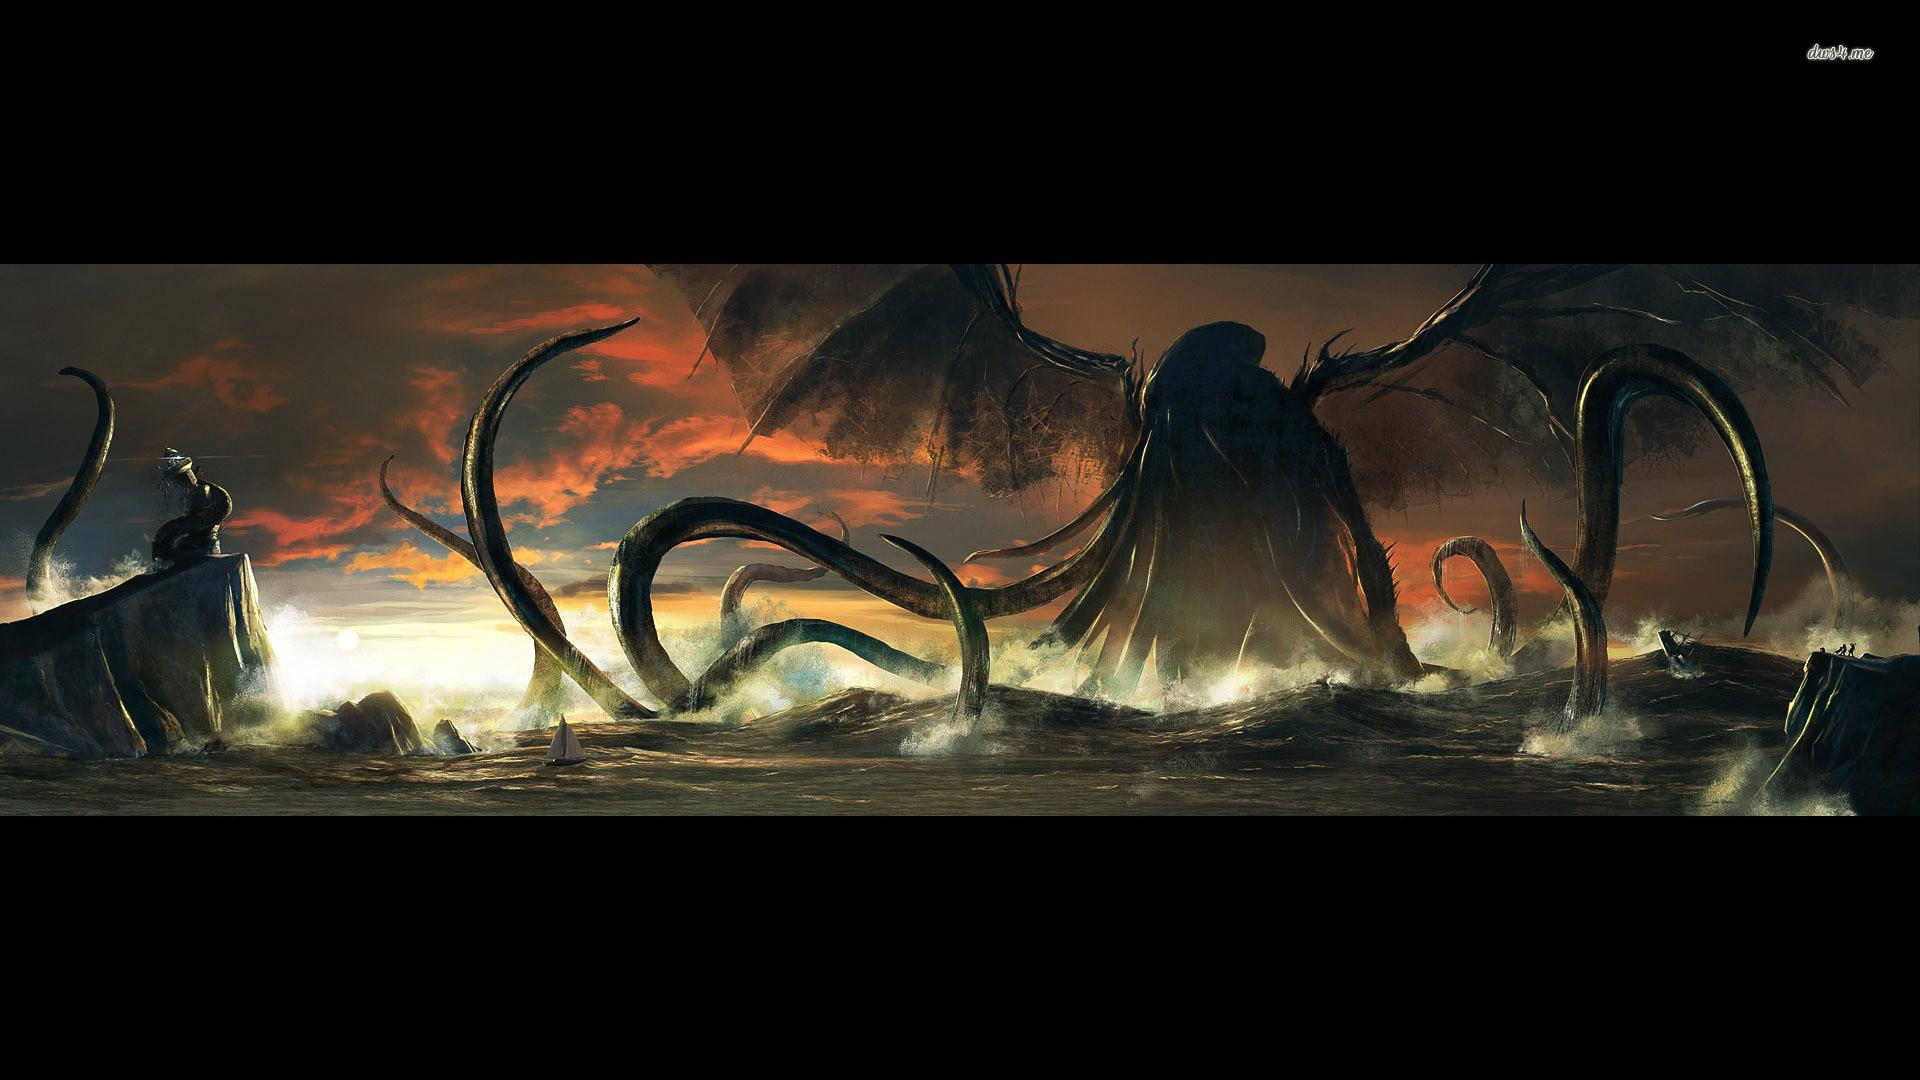 The monstrous god Cthulhu rises to claim mastery of the seas. Wallpaper